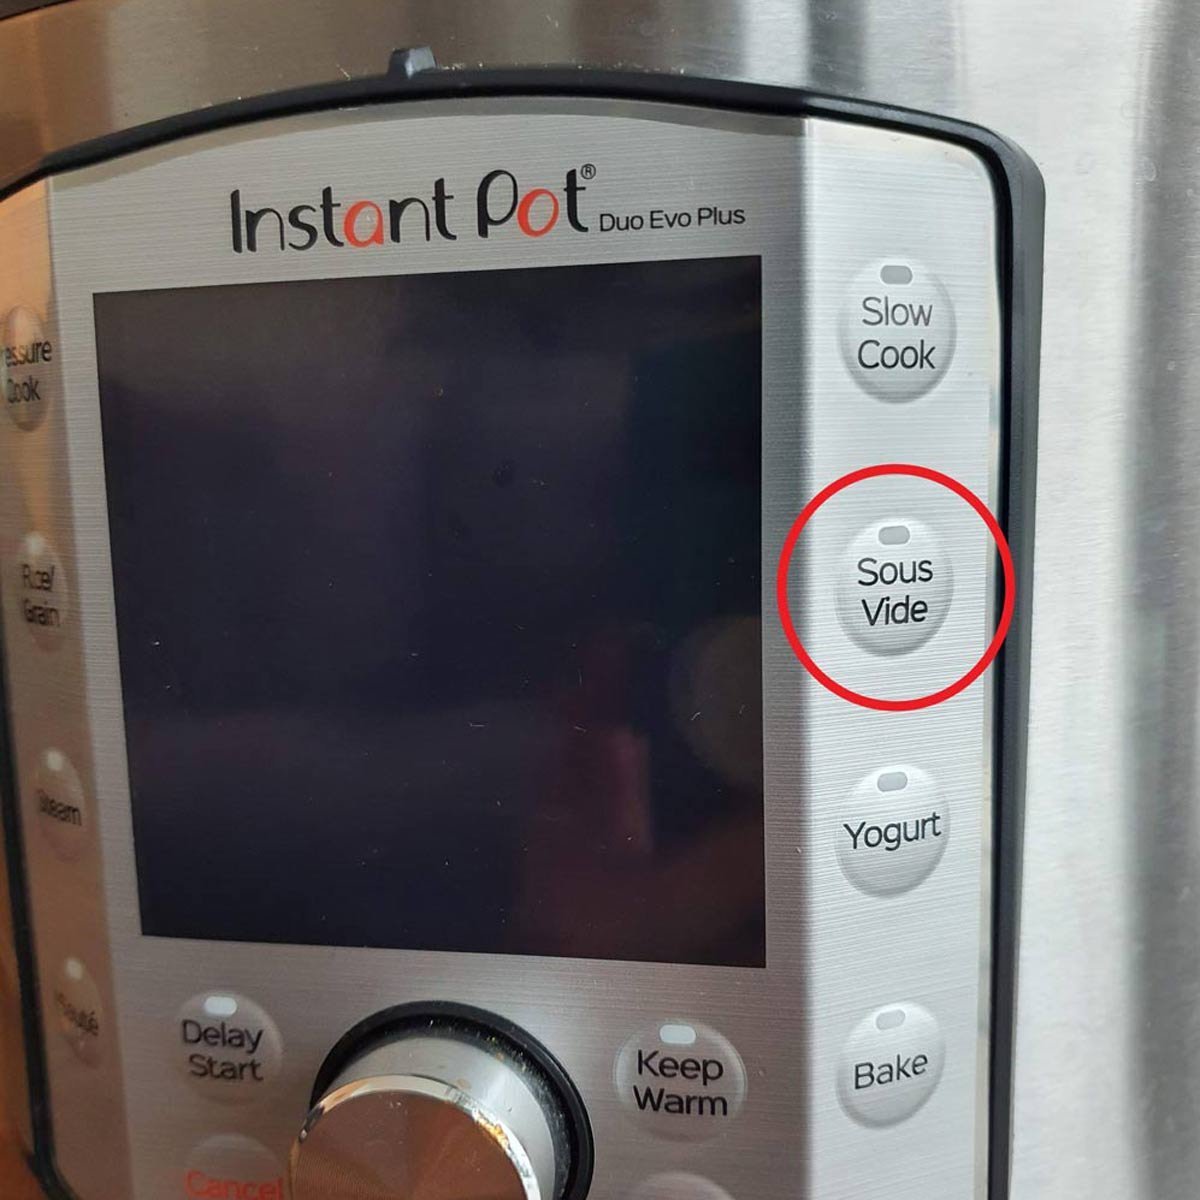 How to Use Some of the Instant Pot Functions